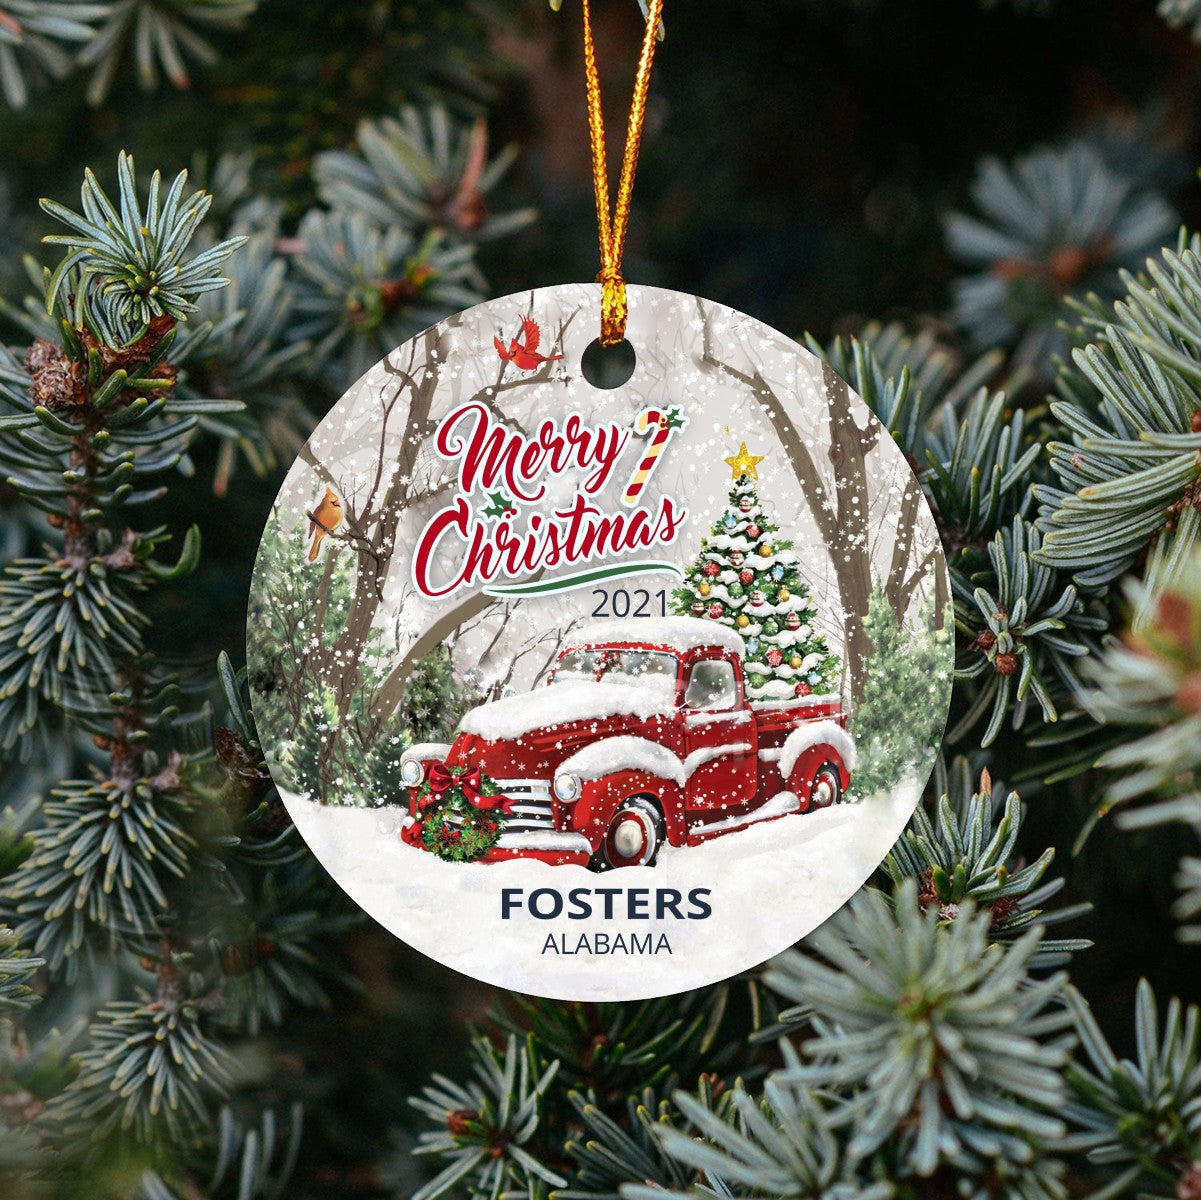 Christmas Tree Ornaments Fosters - Ornament With Name City, State Fosters Alabama AL Ornament - Red Truck Xmas Ornaments 3'' Plastic Gift For Family, Friend And Housewarming